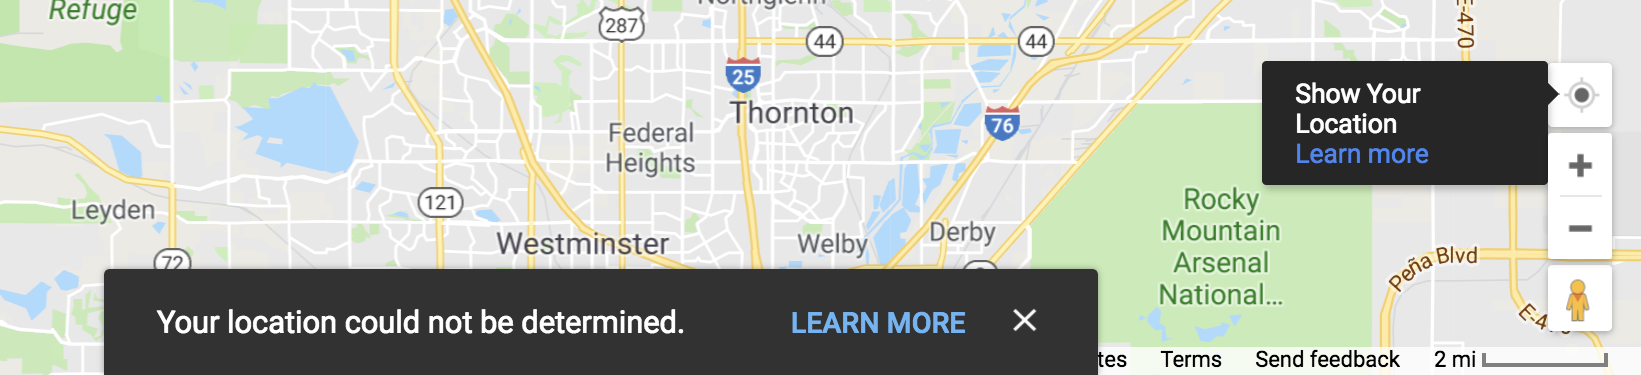 google maps - location could not be determined